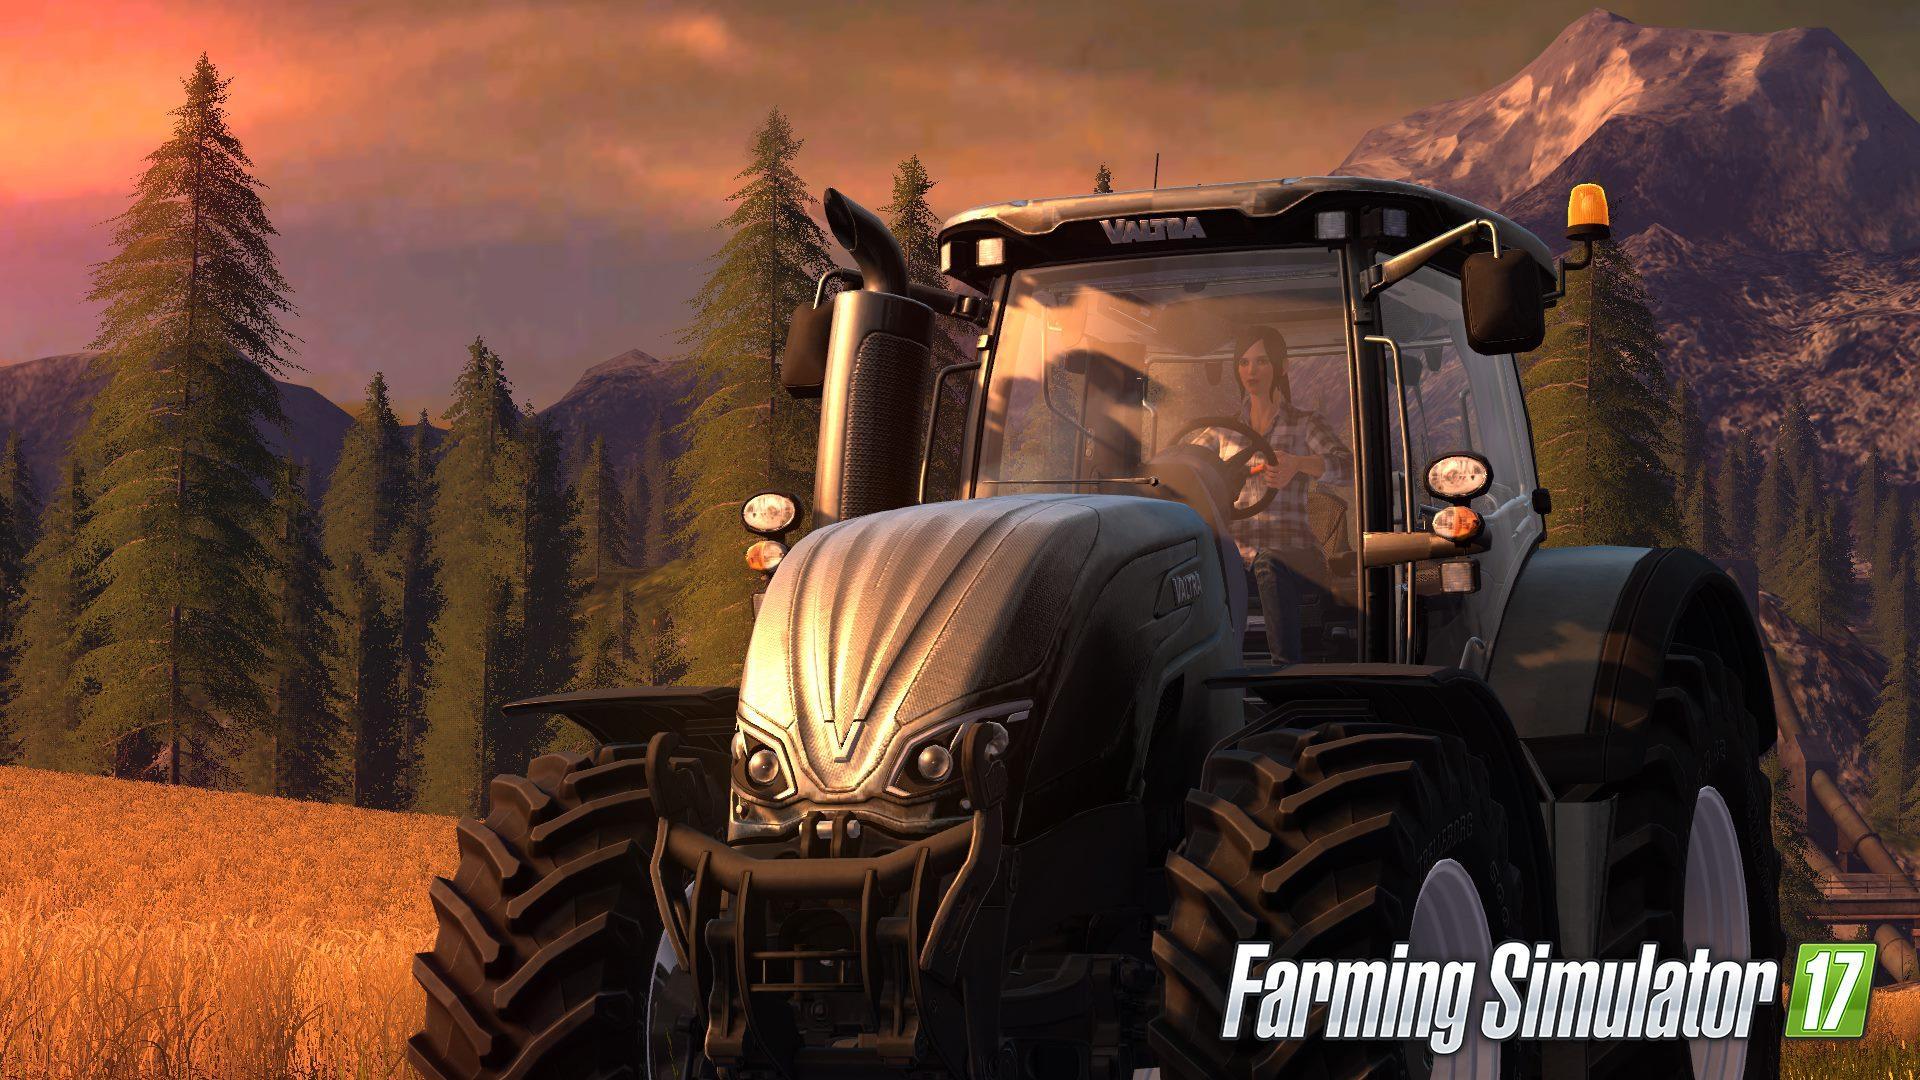 FS17 offers the option to play as a female farmer. Farming